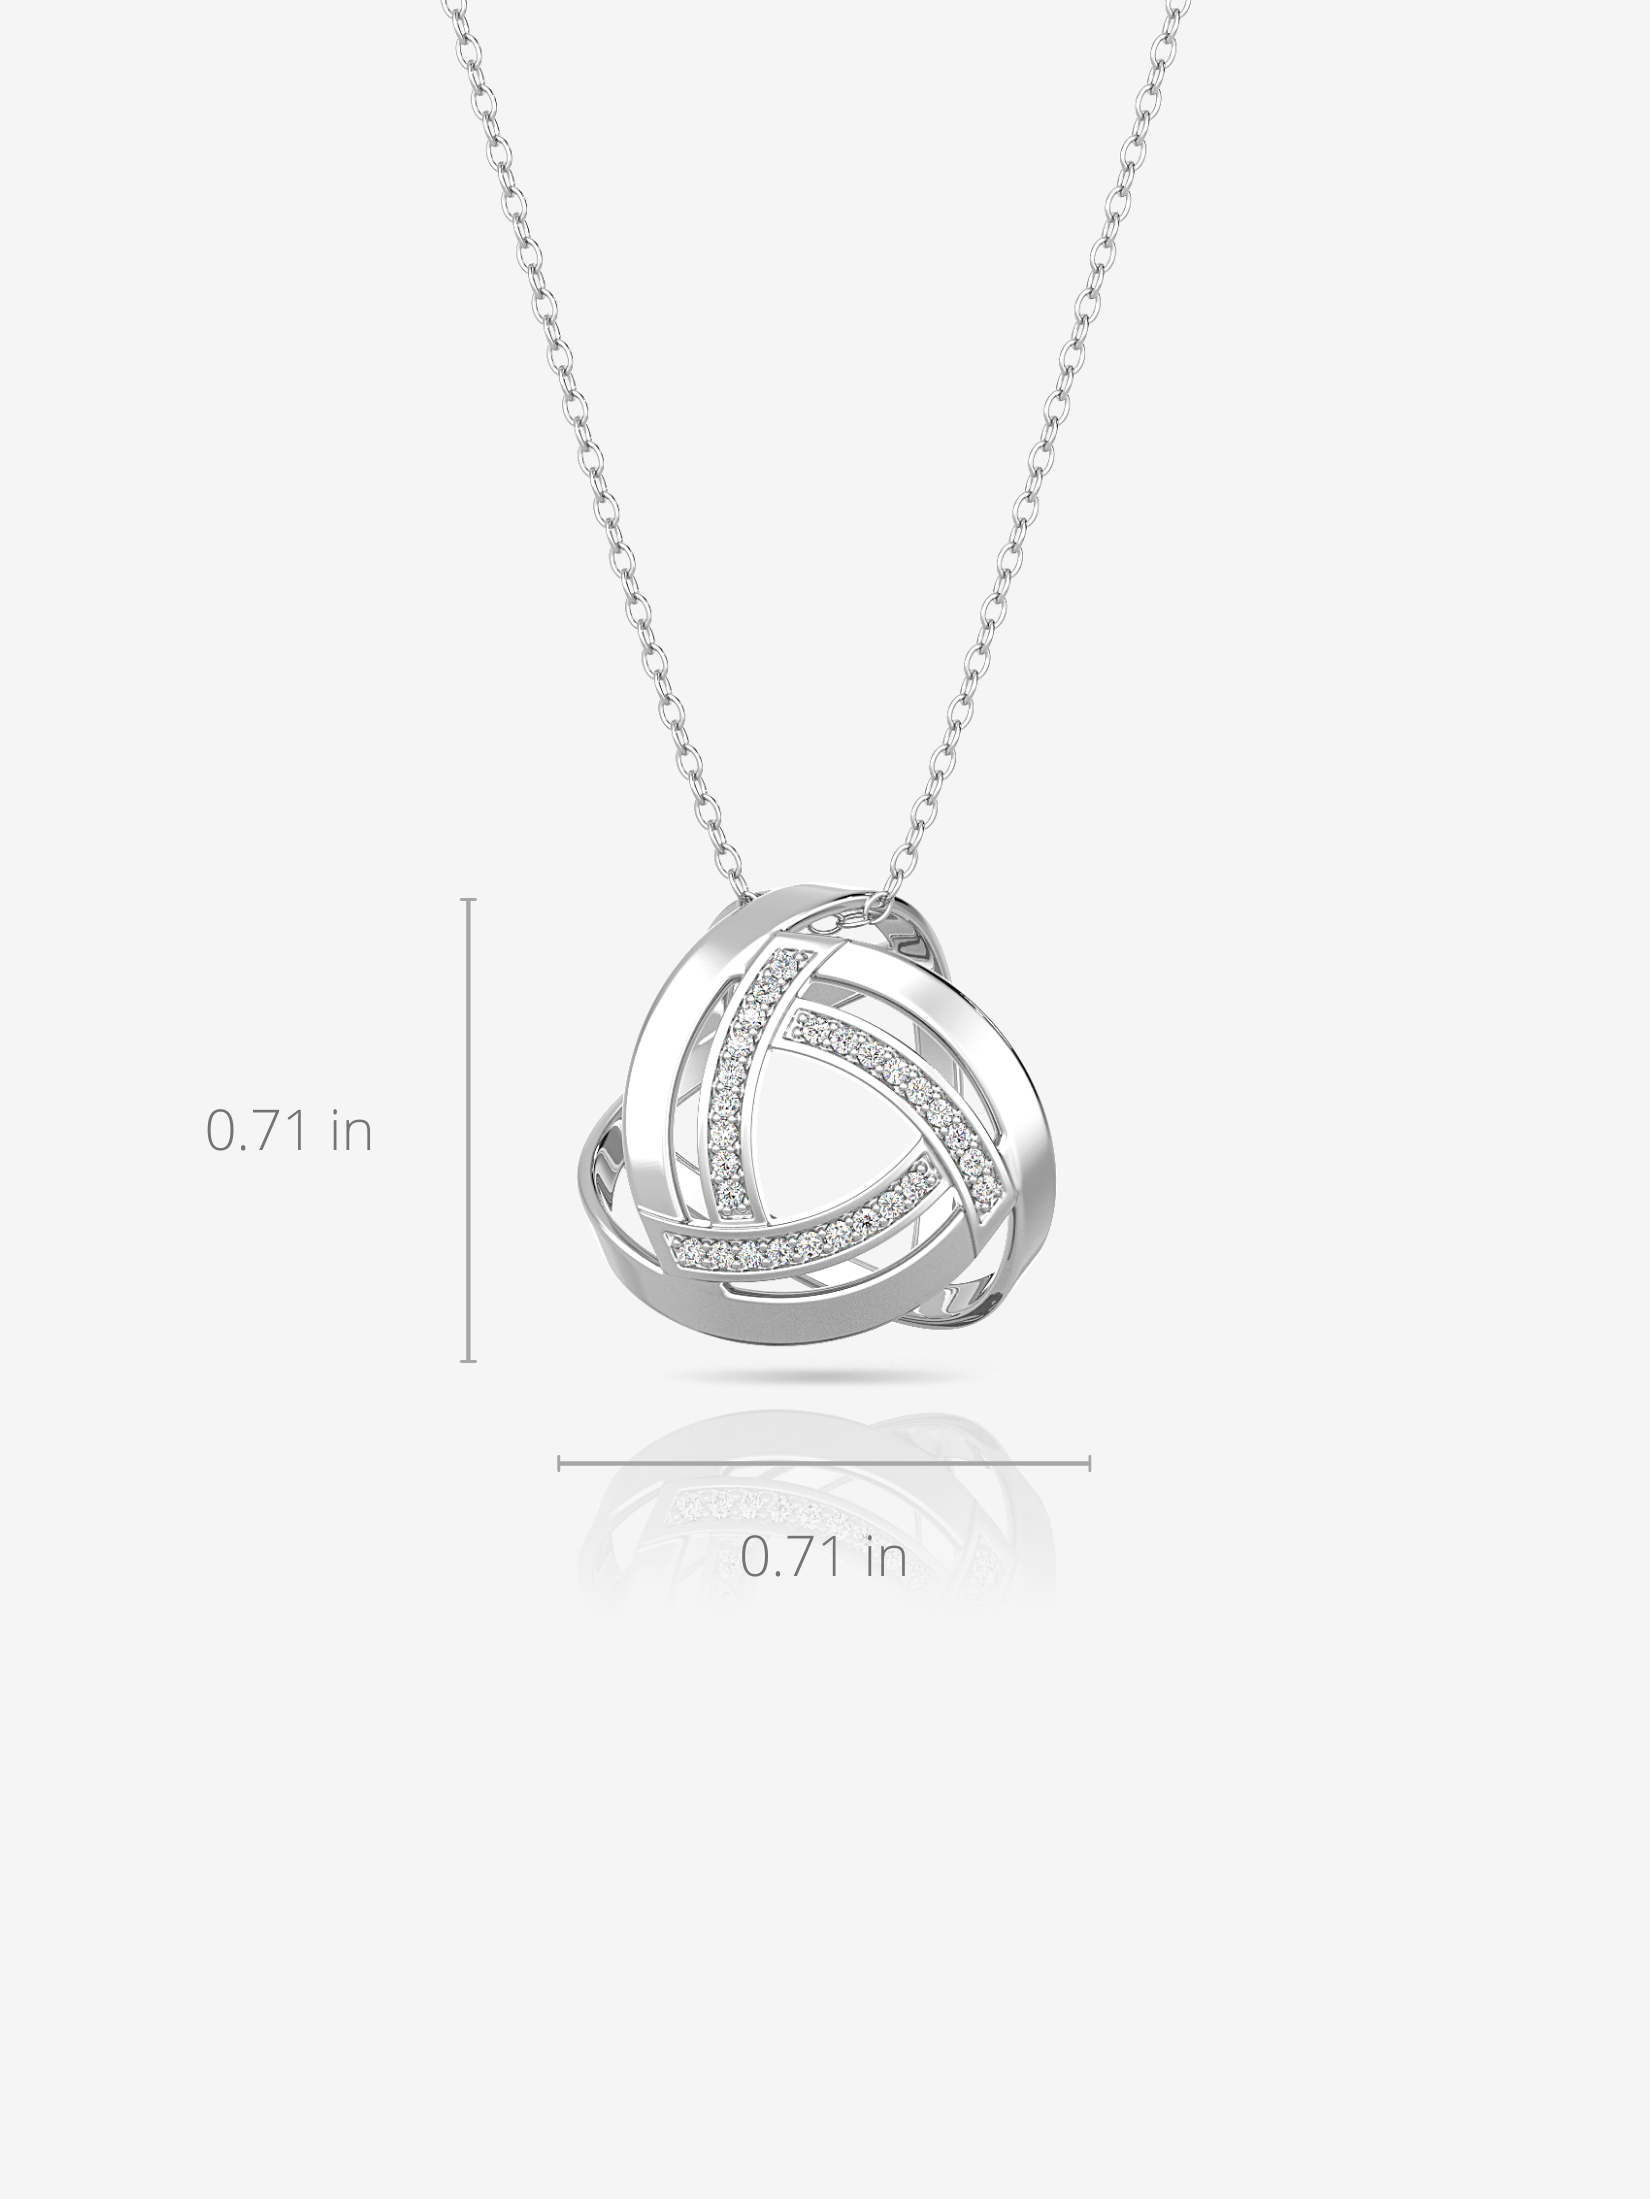 EUEAVAN Silver Witches Knot Necklace Stainless Steel Celtics Magic Knot  Amulet Jewelry Gift - Walmart.com